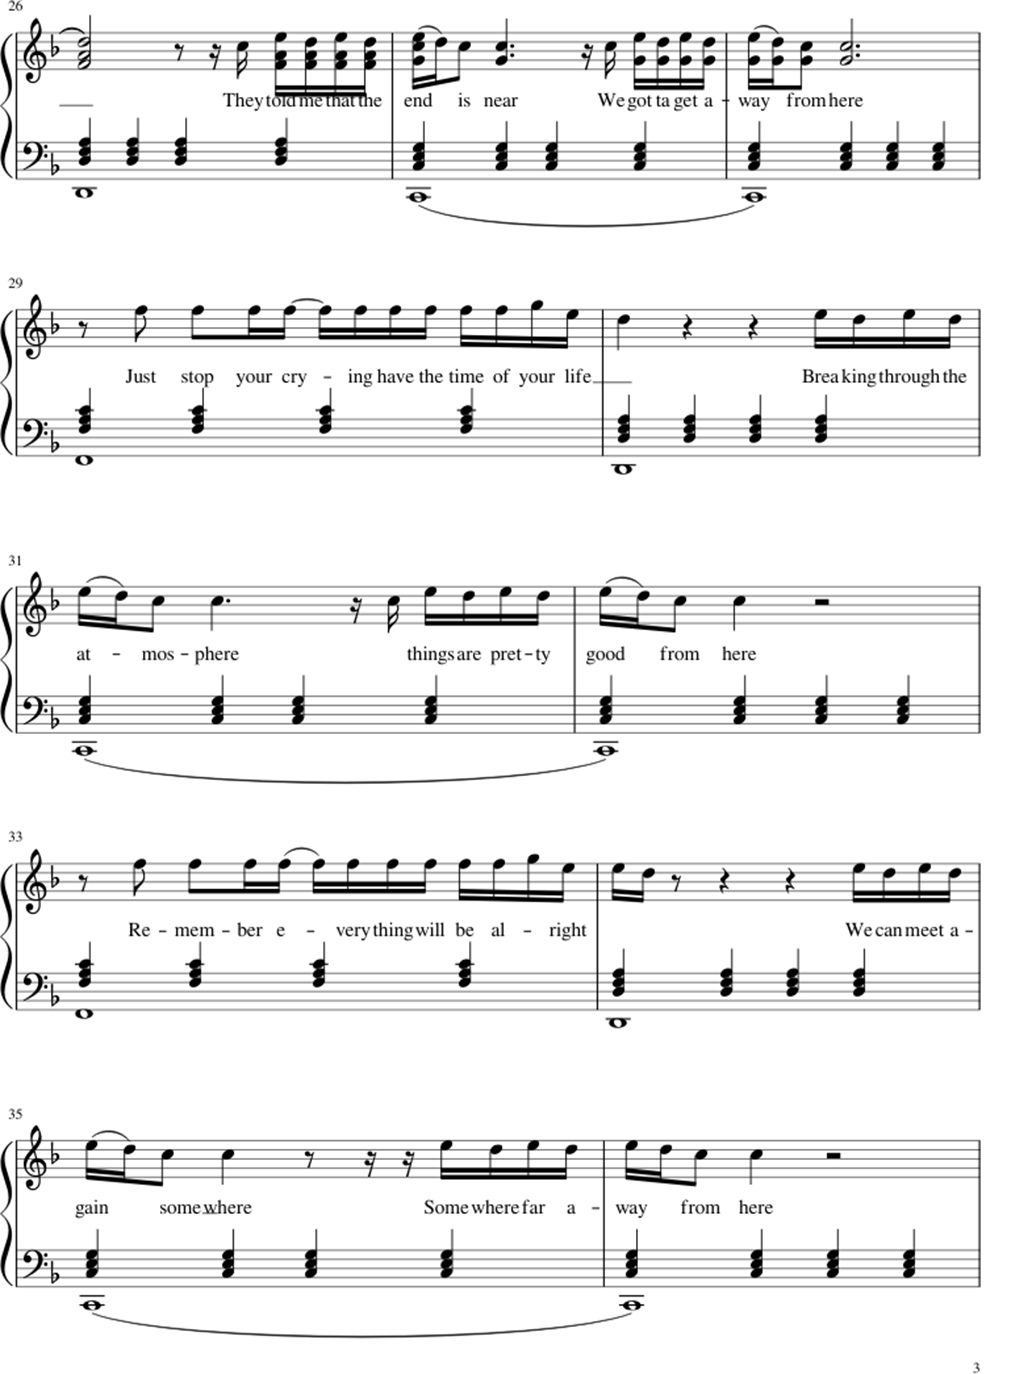 Sign of the time sheet music notes 3